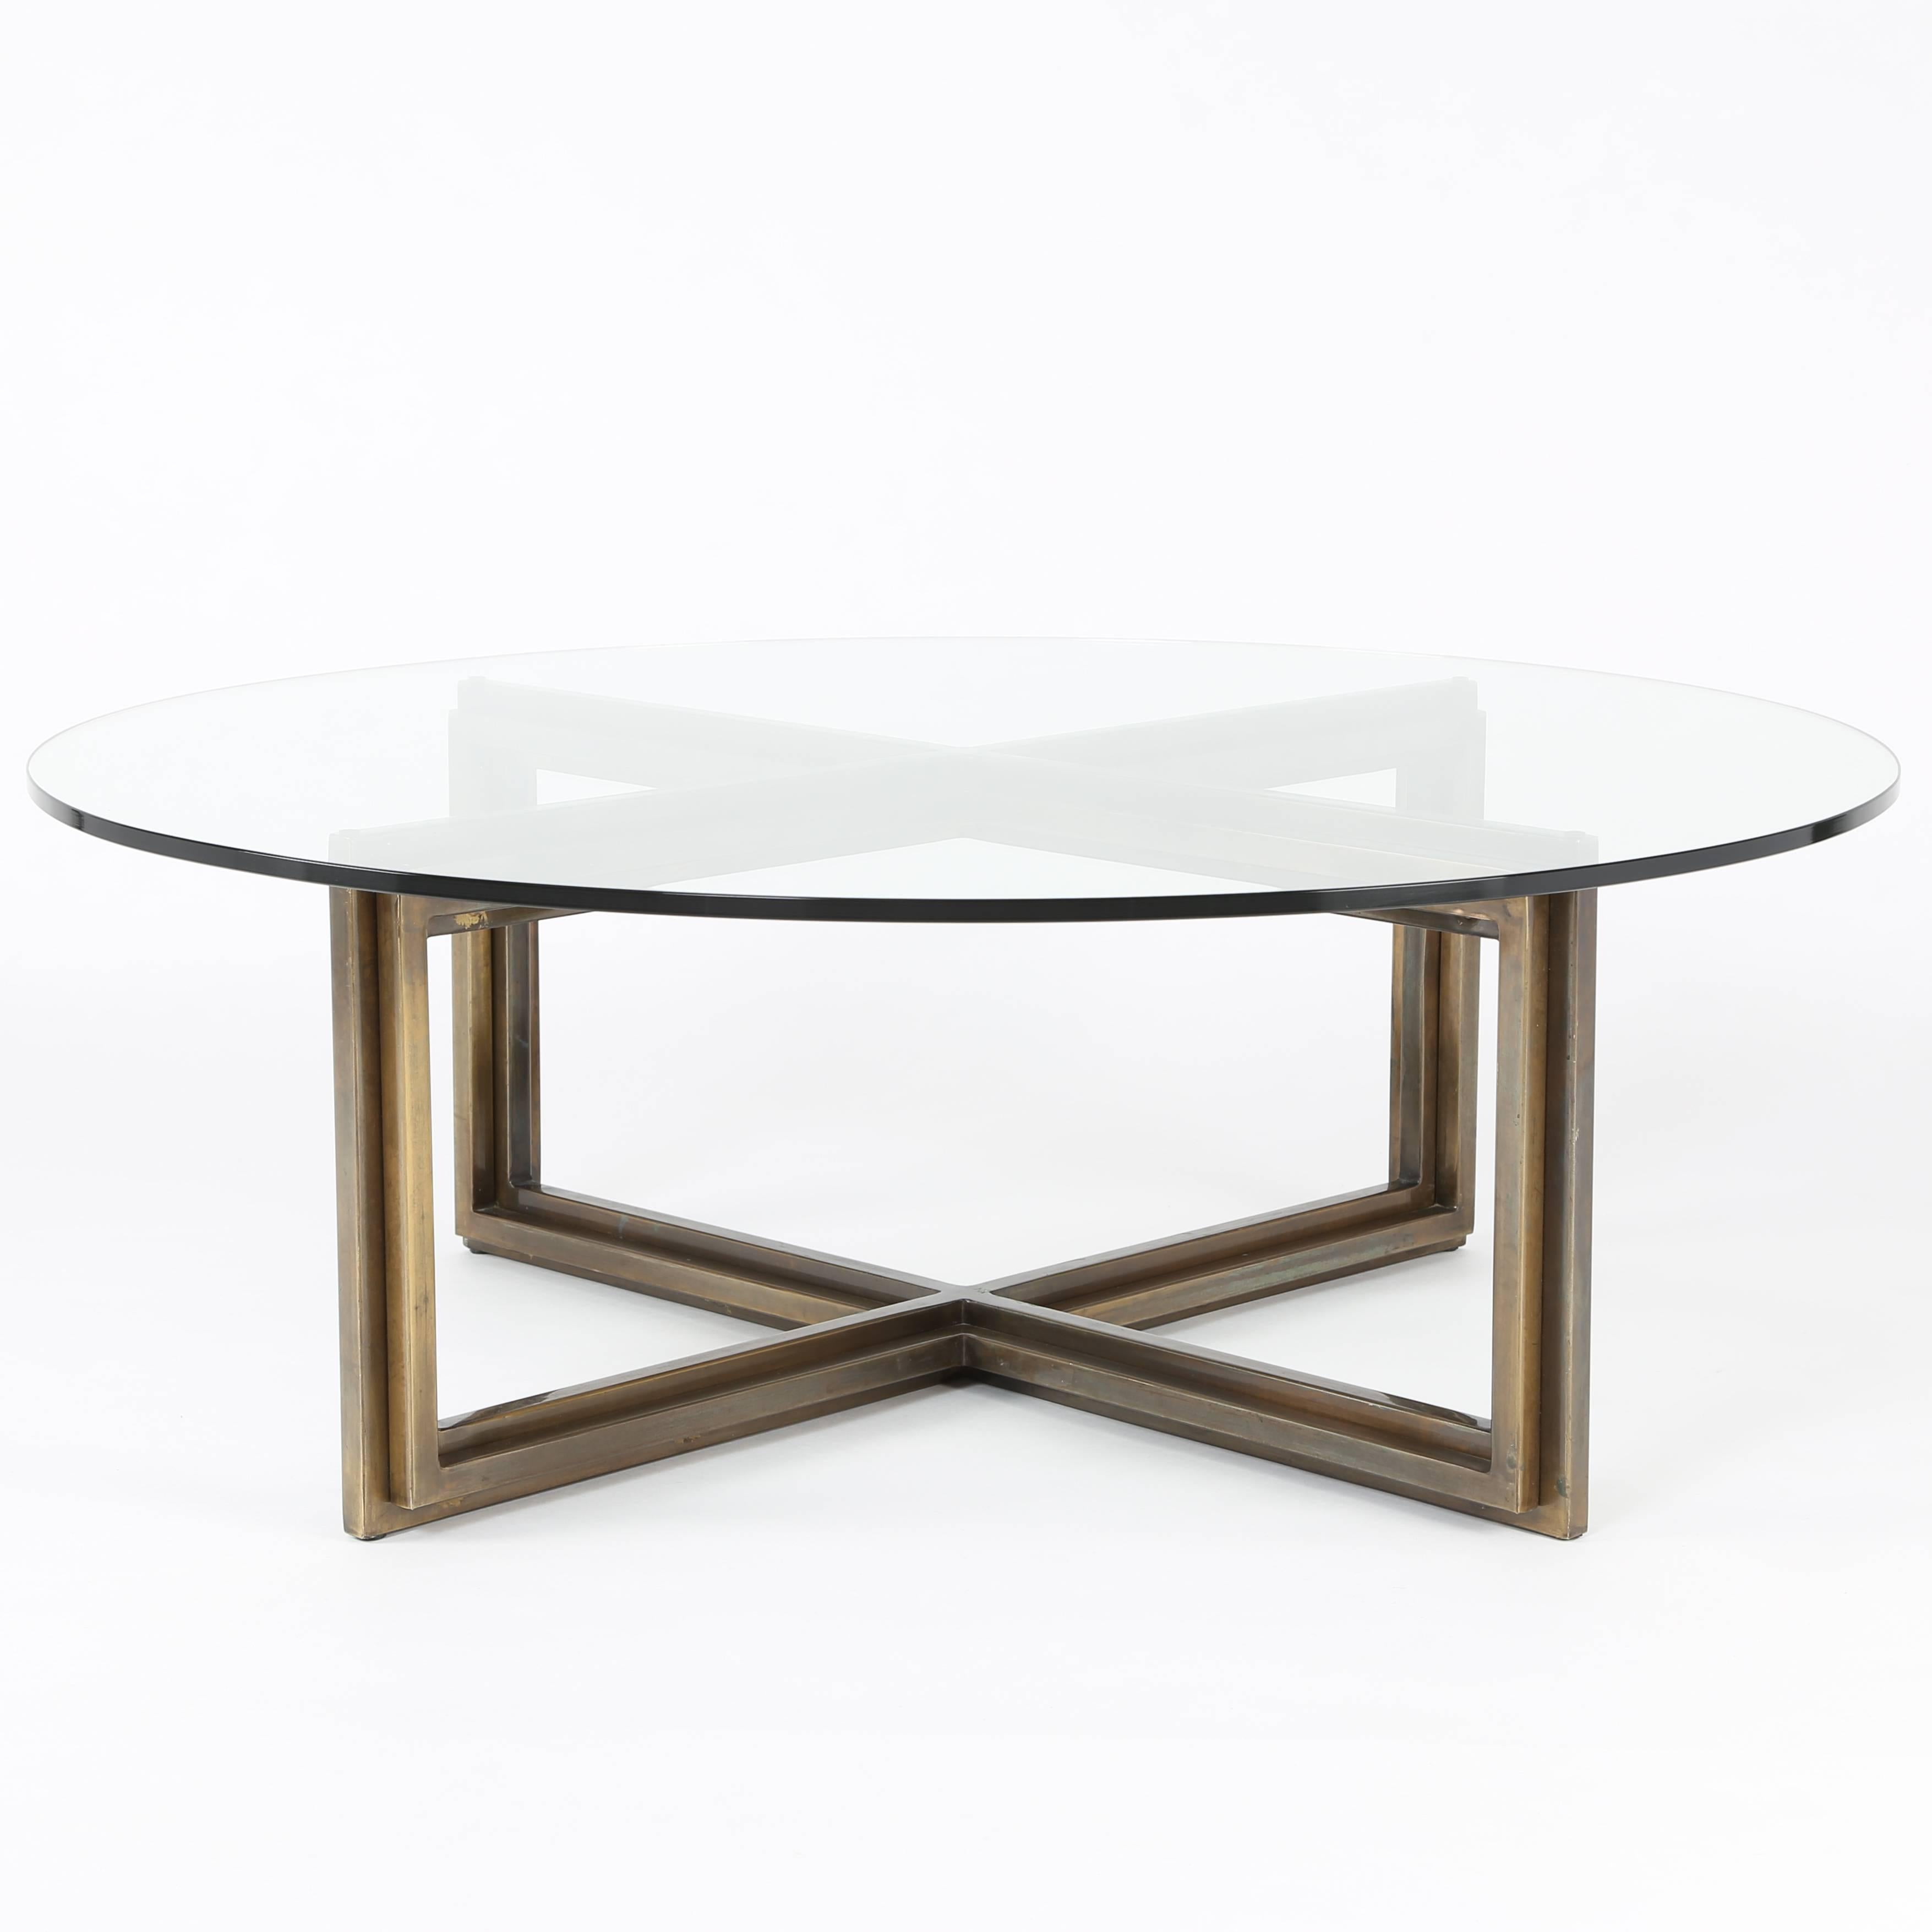 Heavy and beautifully crafted bronze X-base coffee table with a new 1/2